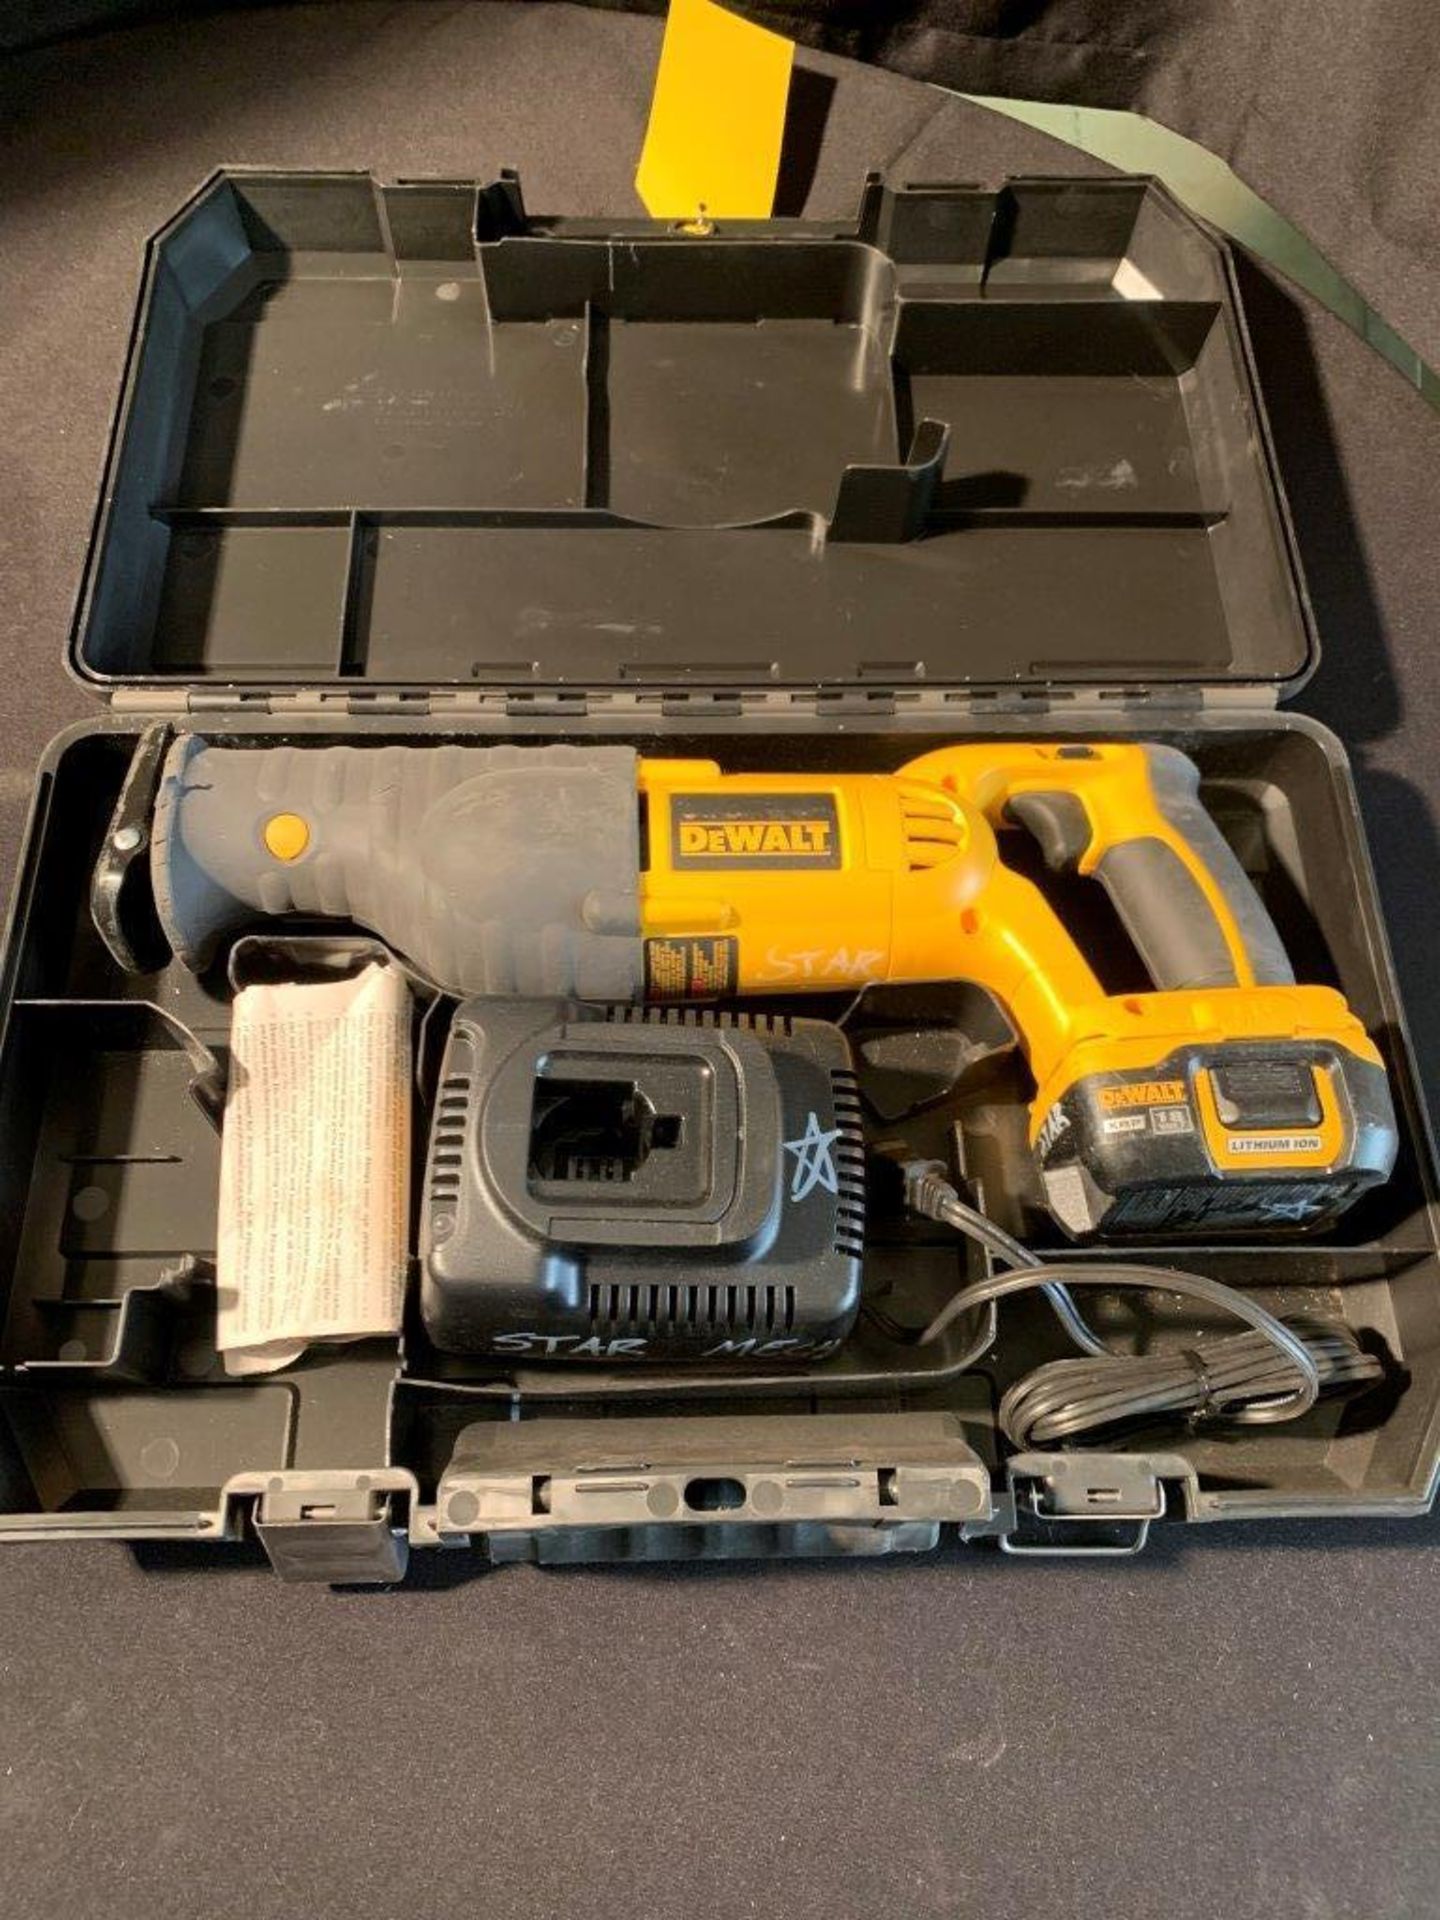 DEWALT CORDLESS 18V RECIPROCATING SAW W/ BATTERY AND CHARGER